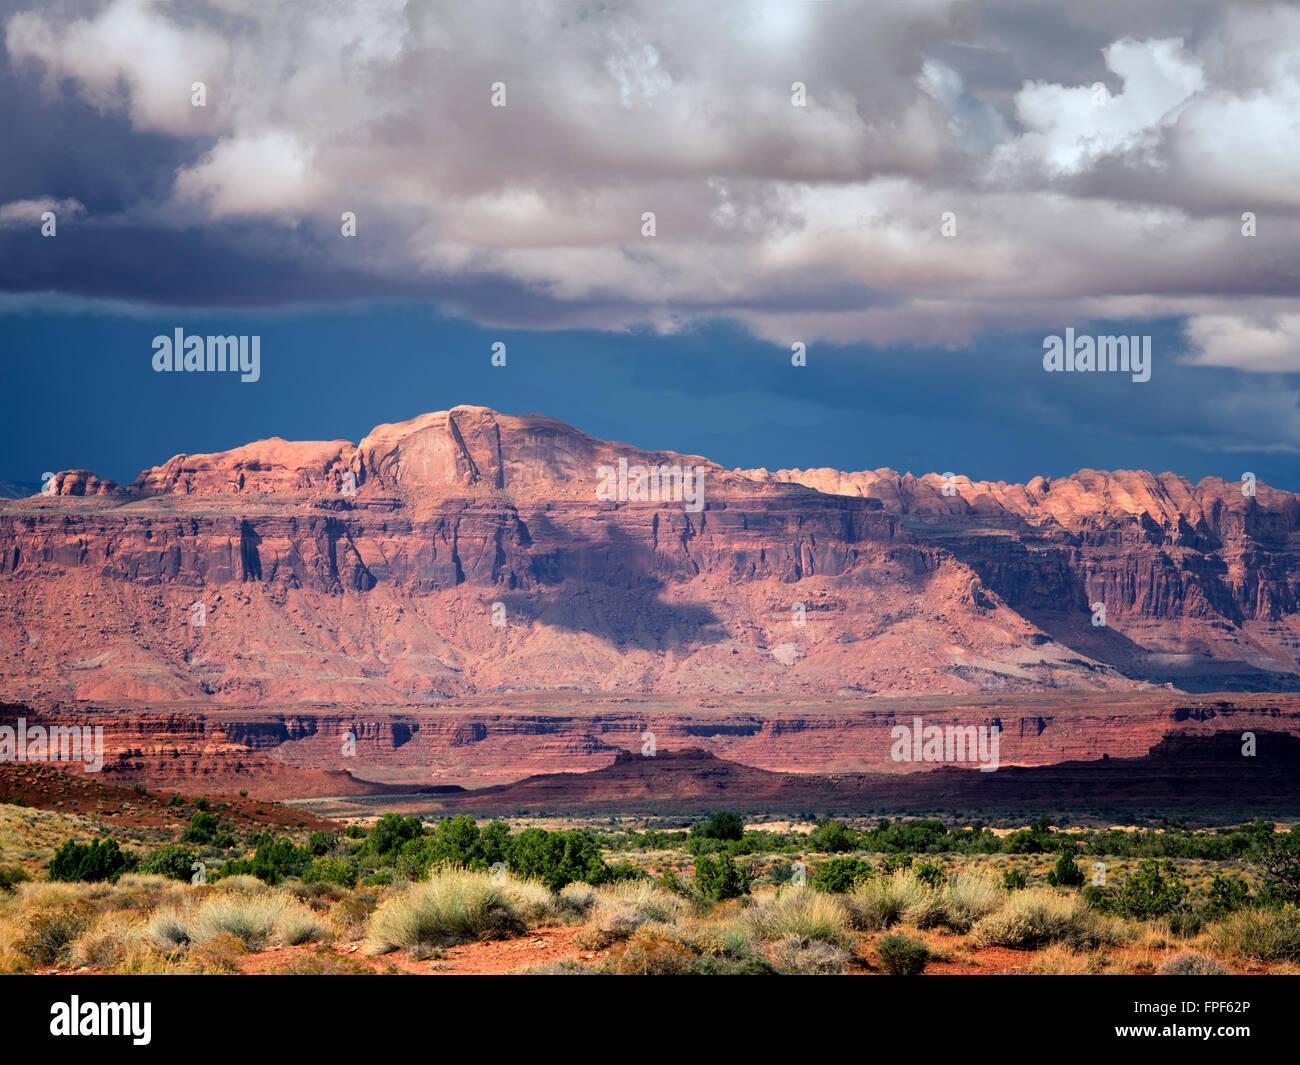 Mountains with storm clouds. Off Scenic Byway Hwy 95, Glen Canyon National Recreation Area, Utah Stock Photo